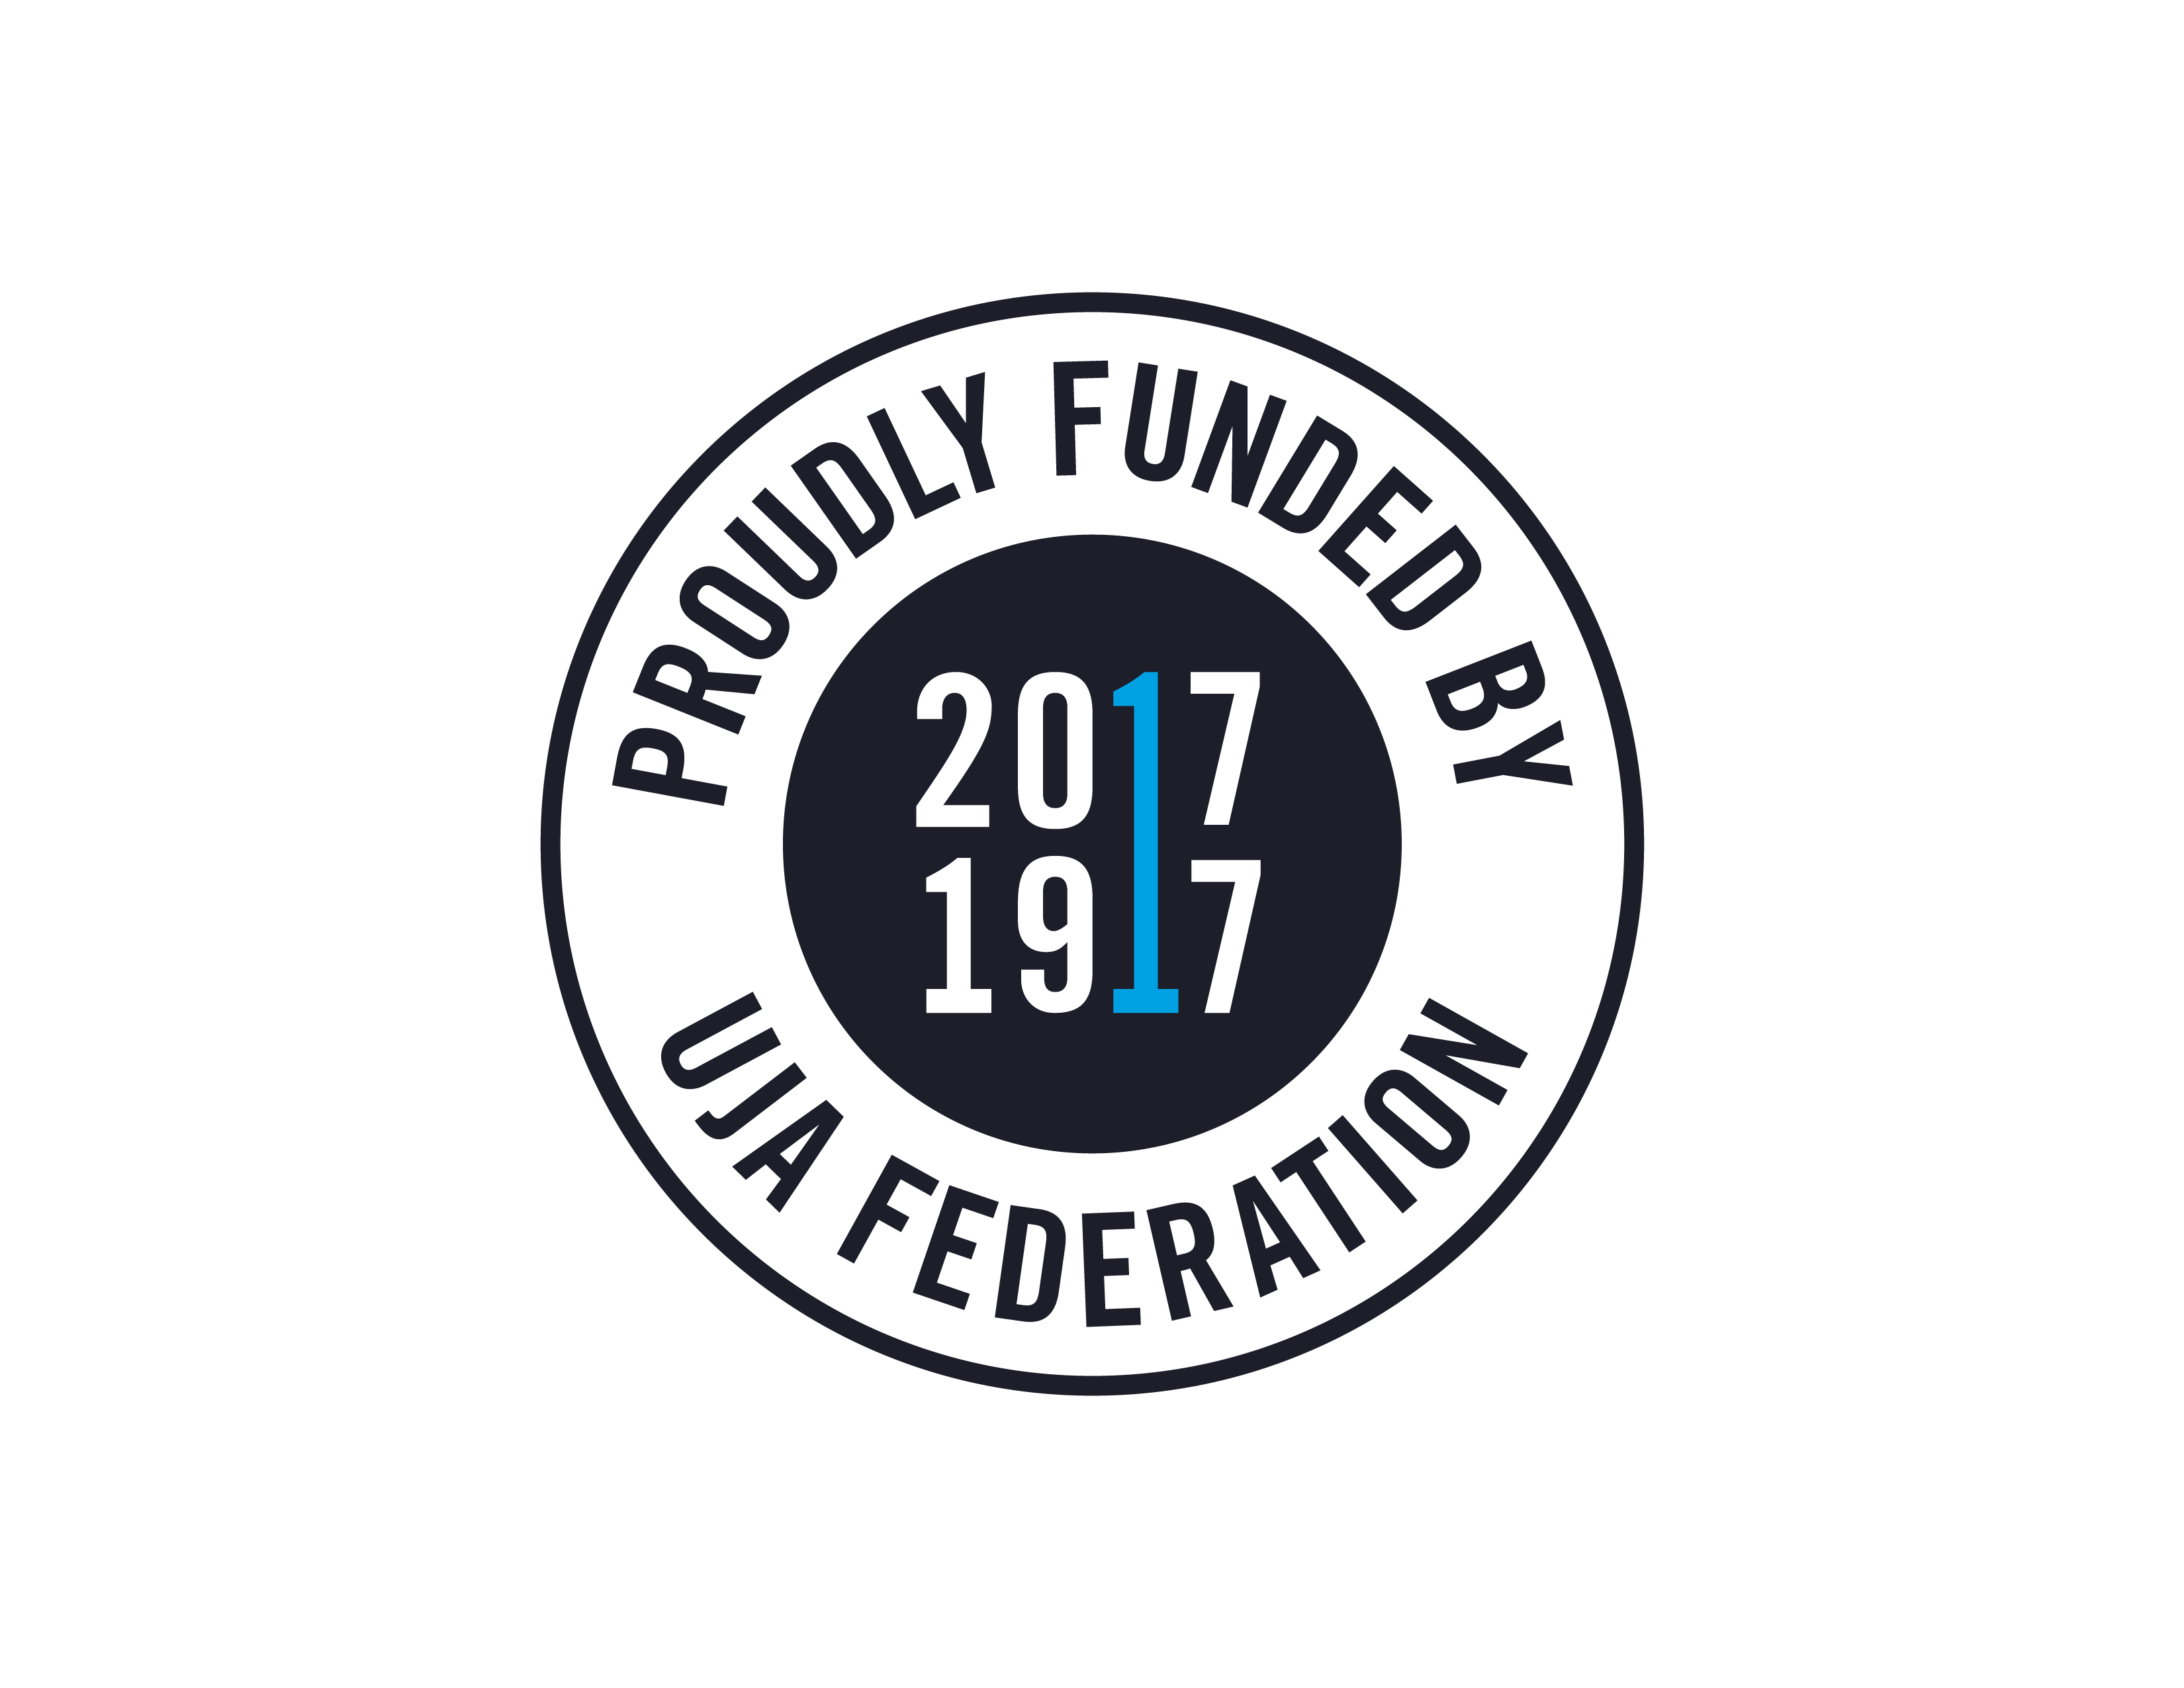 "Proudly funded by UJA Federation" with graphic that says 2017, 1917